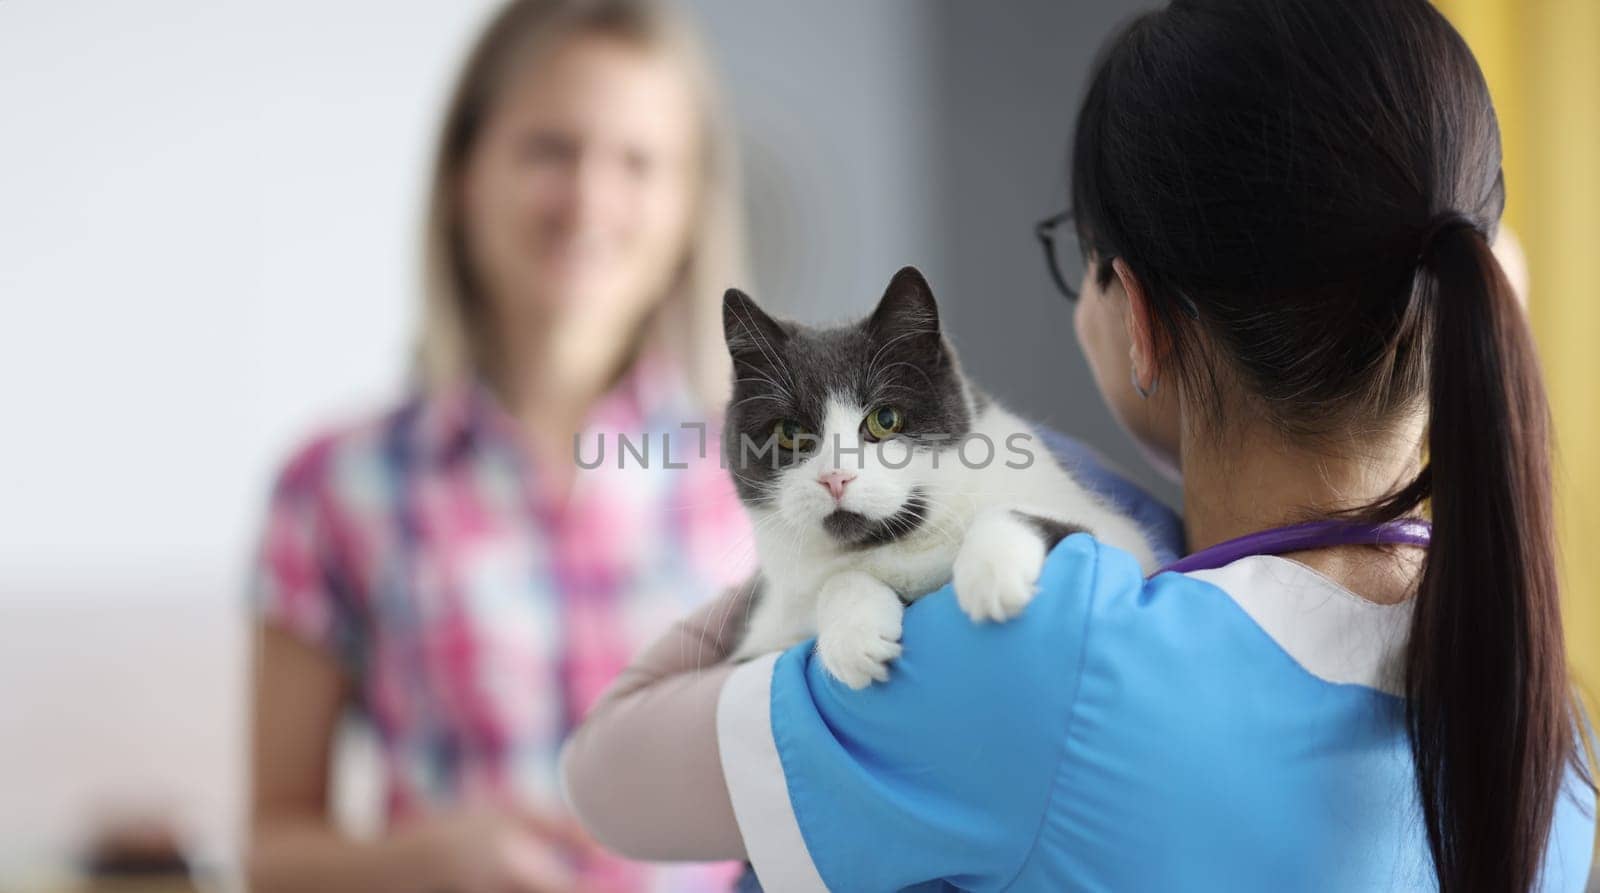 Veterinarian doctor holds cat in his arms. Volunteering and helping homeless animals concept